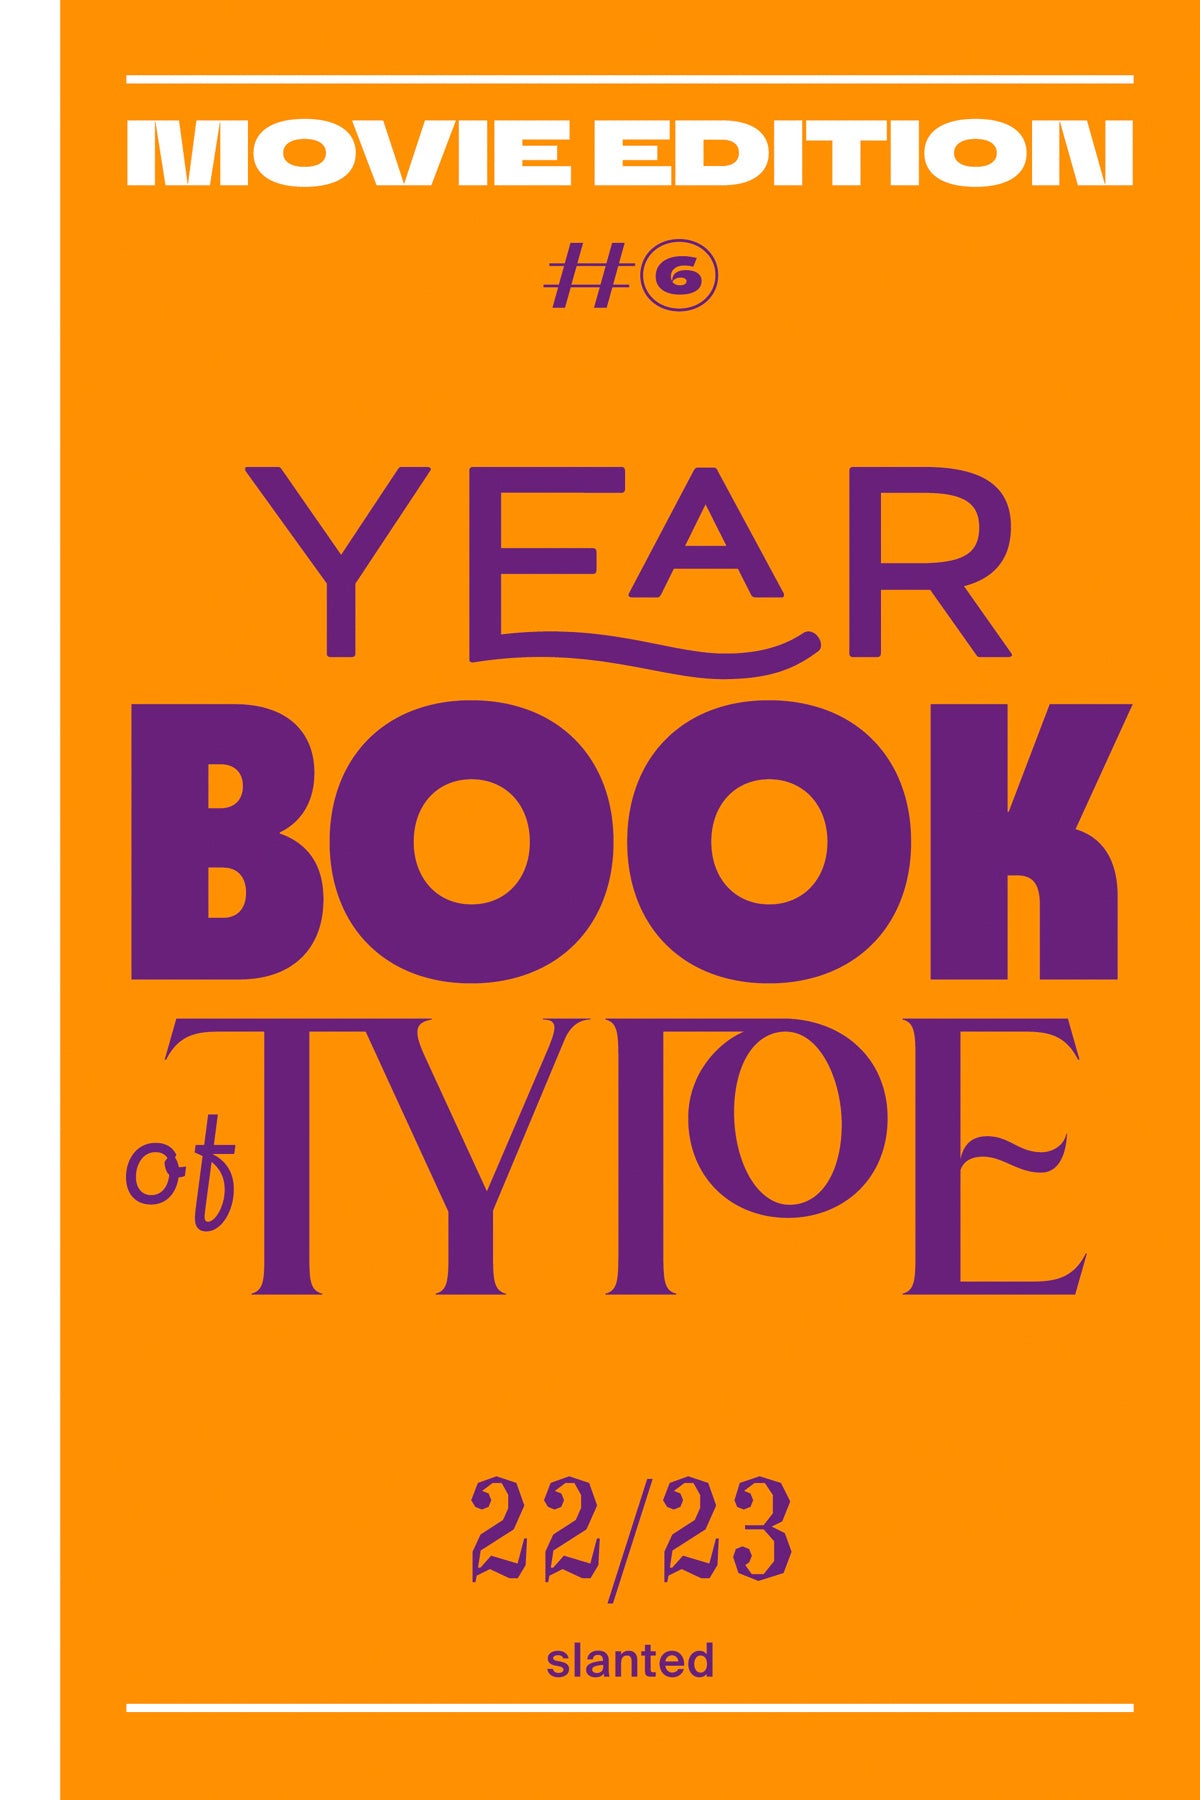 Yearbook of Type #6 22/23